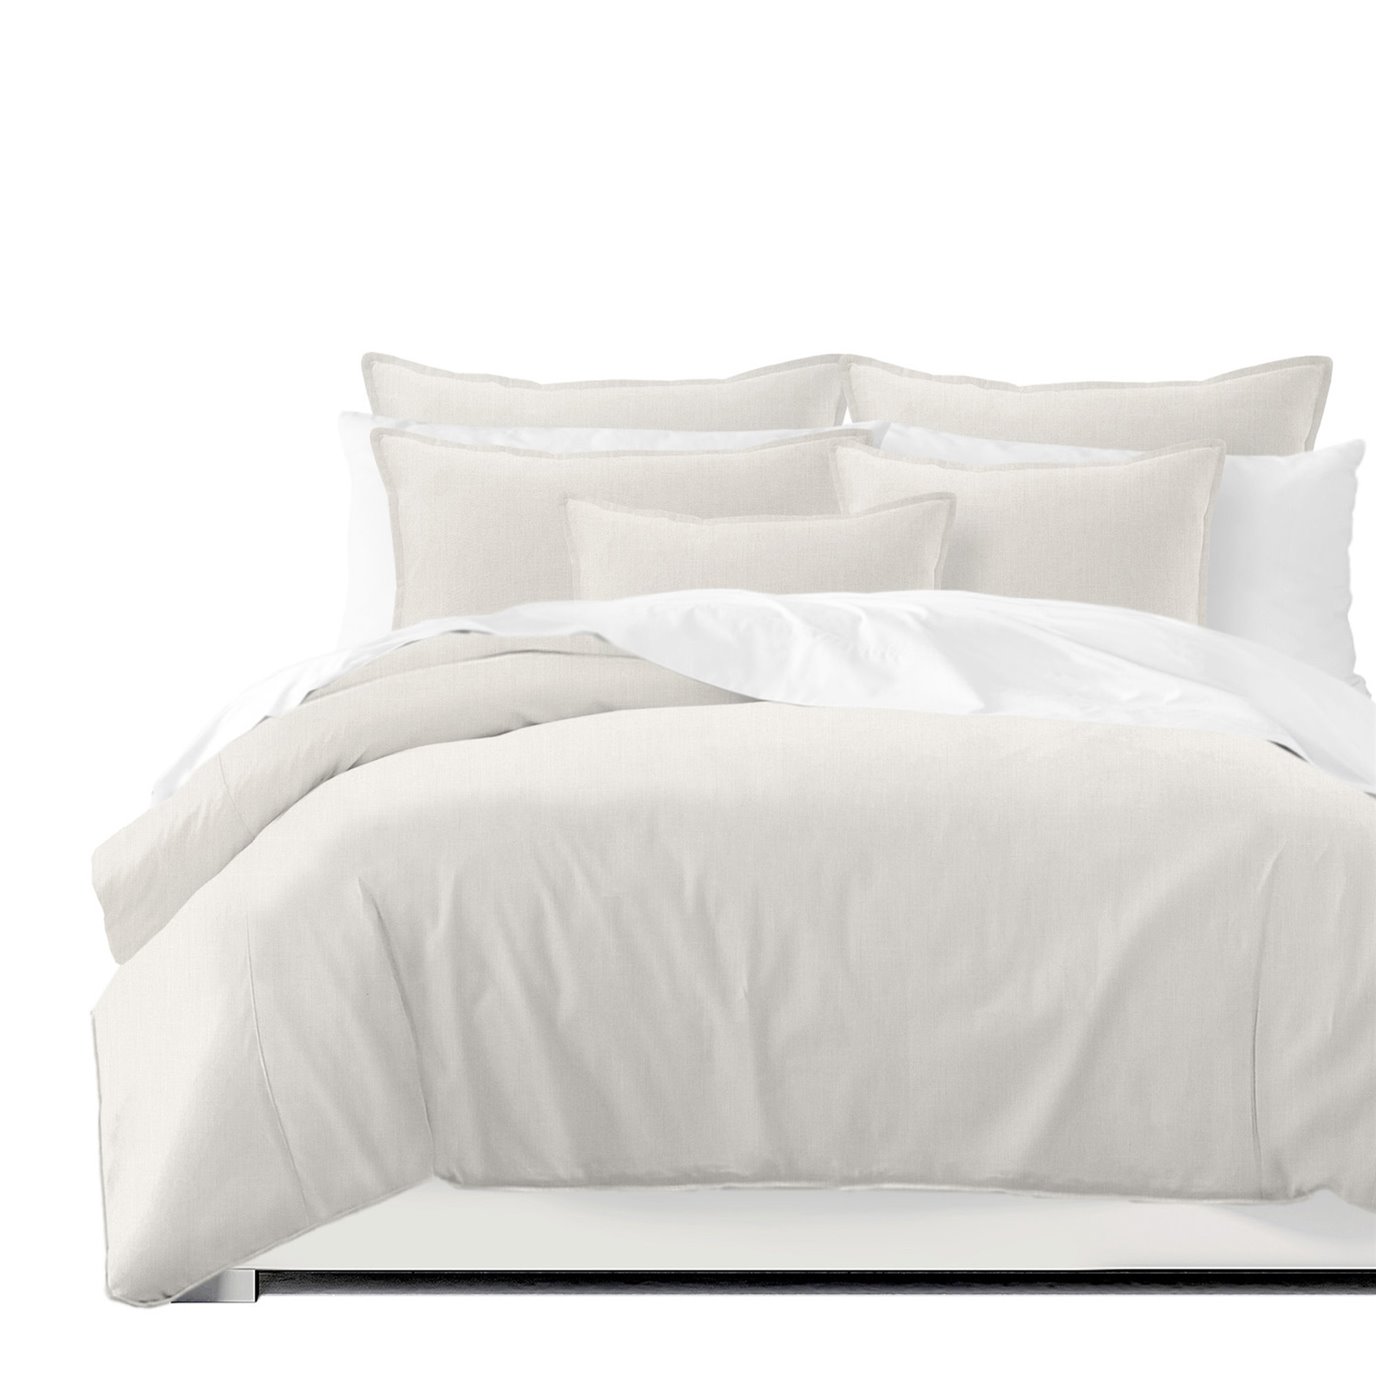 Sutton Pearl Coverlet and Pillow Sham(s) Set - Size Super King